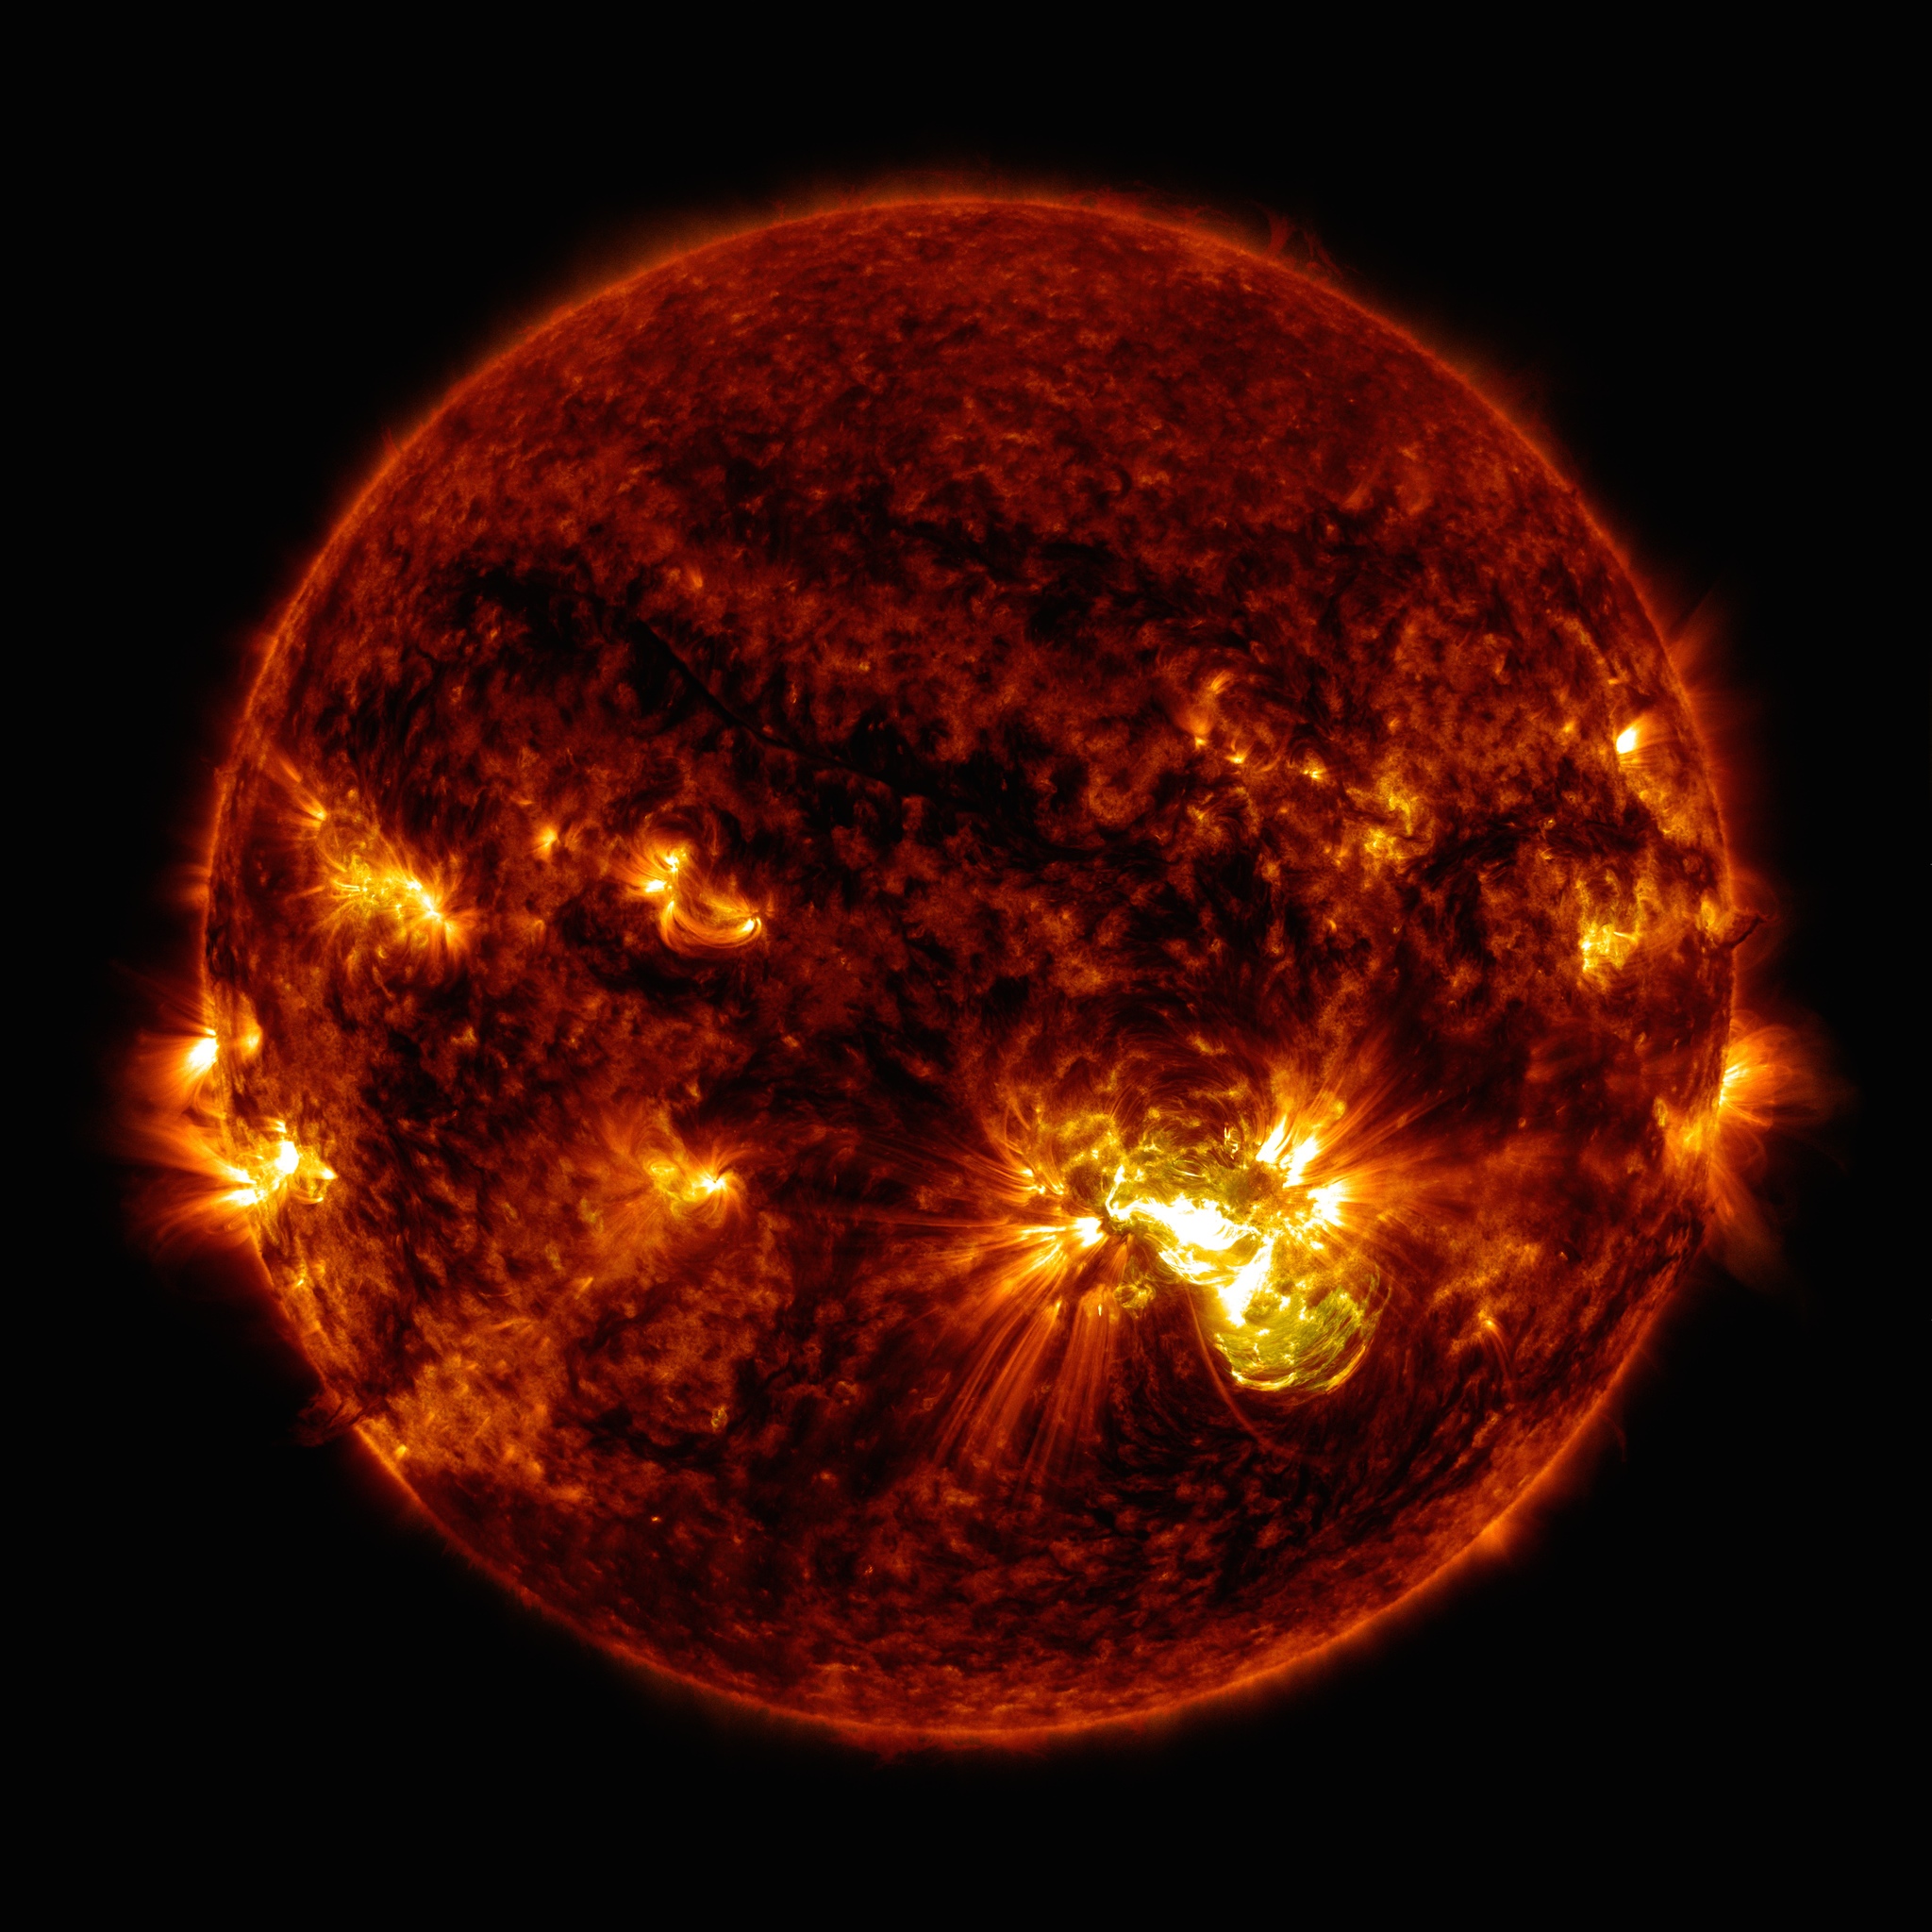 Active region AR 12192 on the sun erupted with a strong flare on Oct. 24, 2014, as seen in the bright light of this image captured by NASA's Solar Dynamics Observatory. This image shows extreme ultraviolet light that highlights the hot solar material in the sun's atmosphere. Credit: NASA/GSFC/SDO